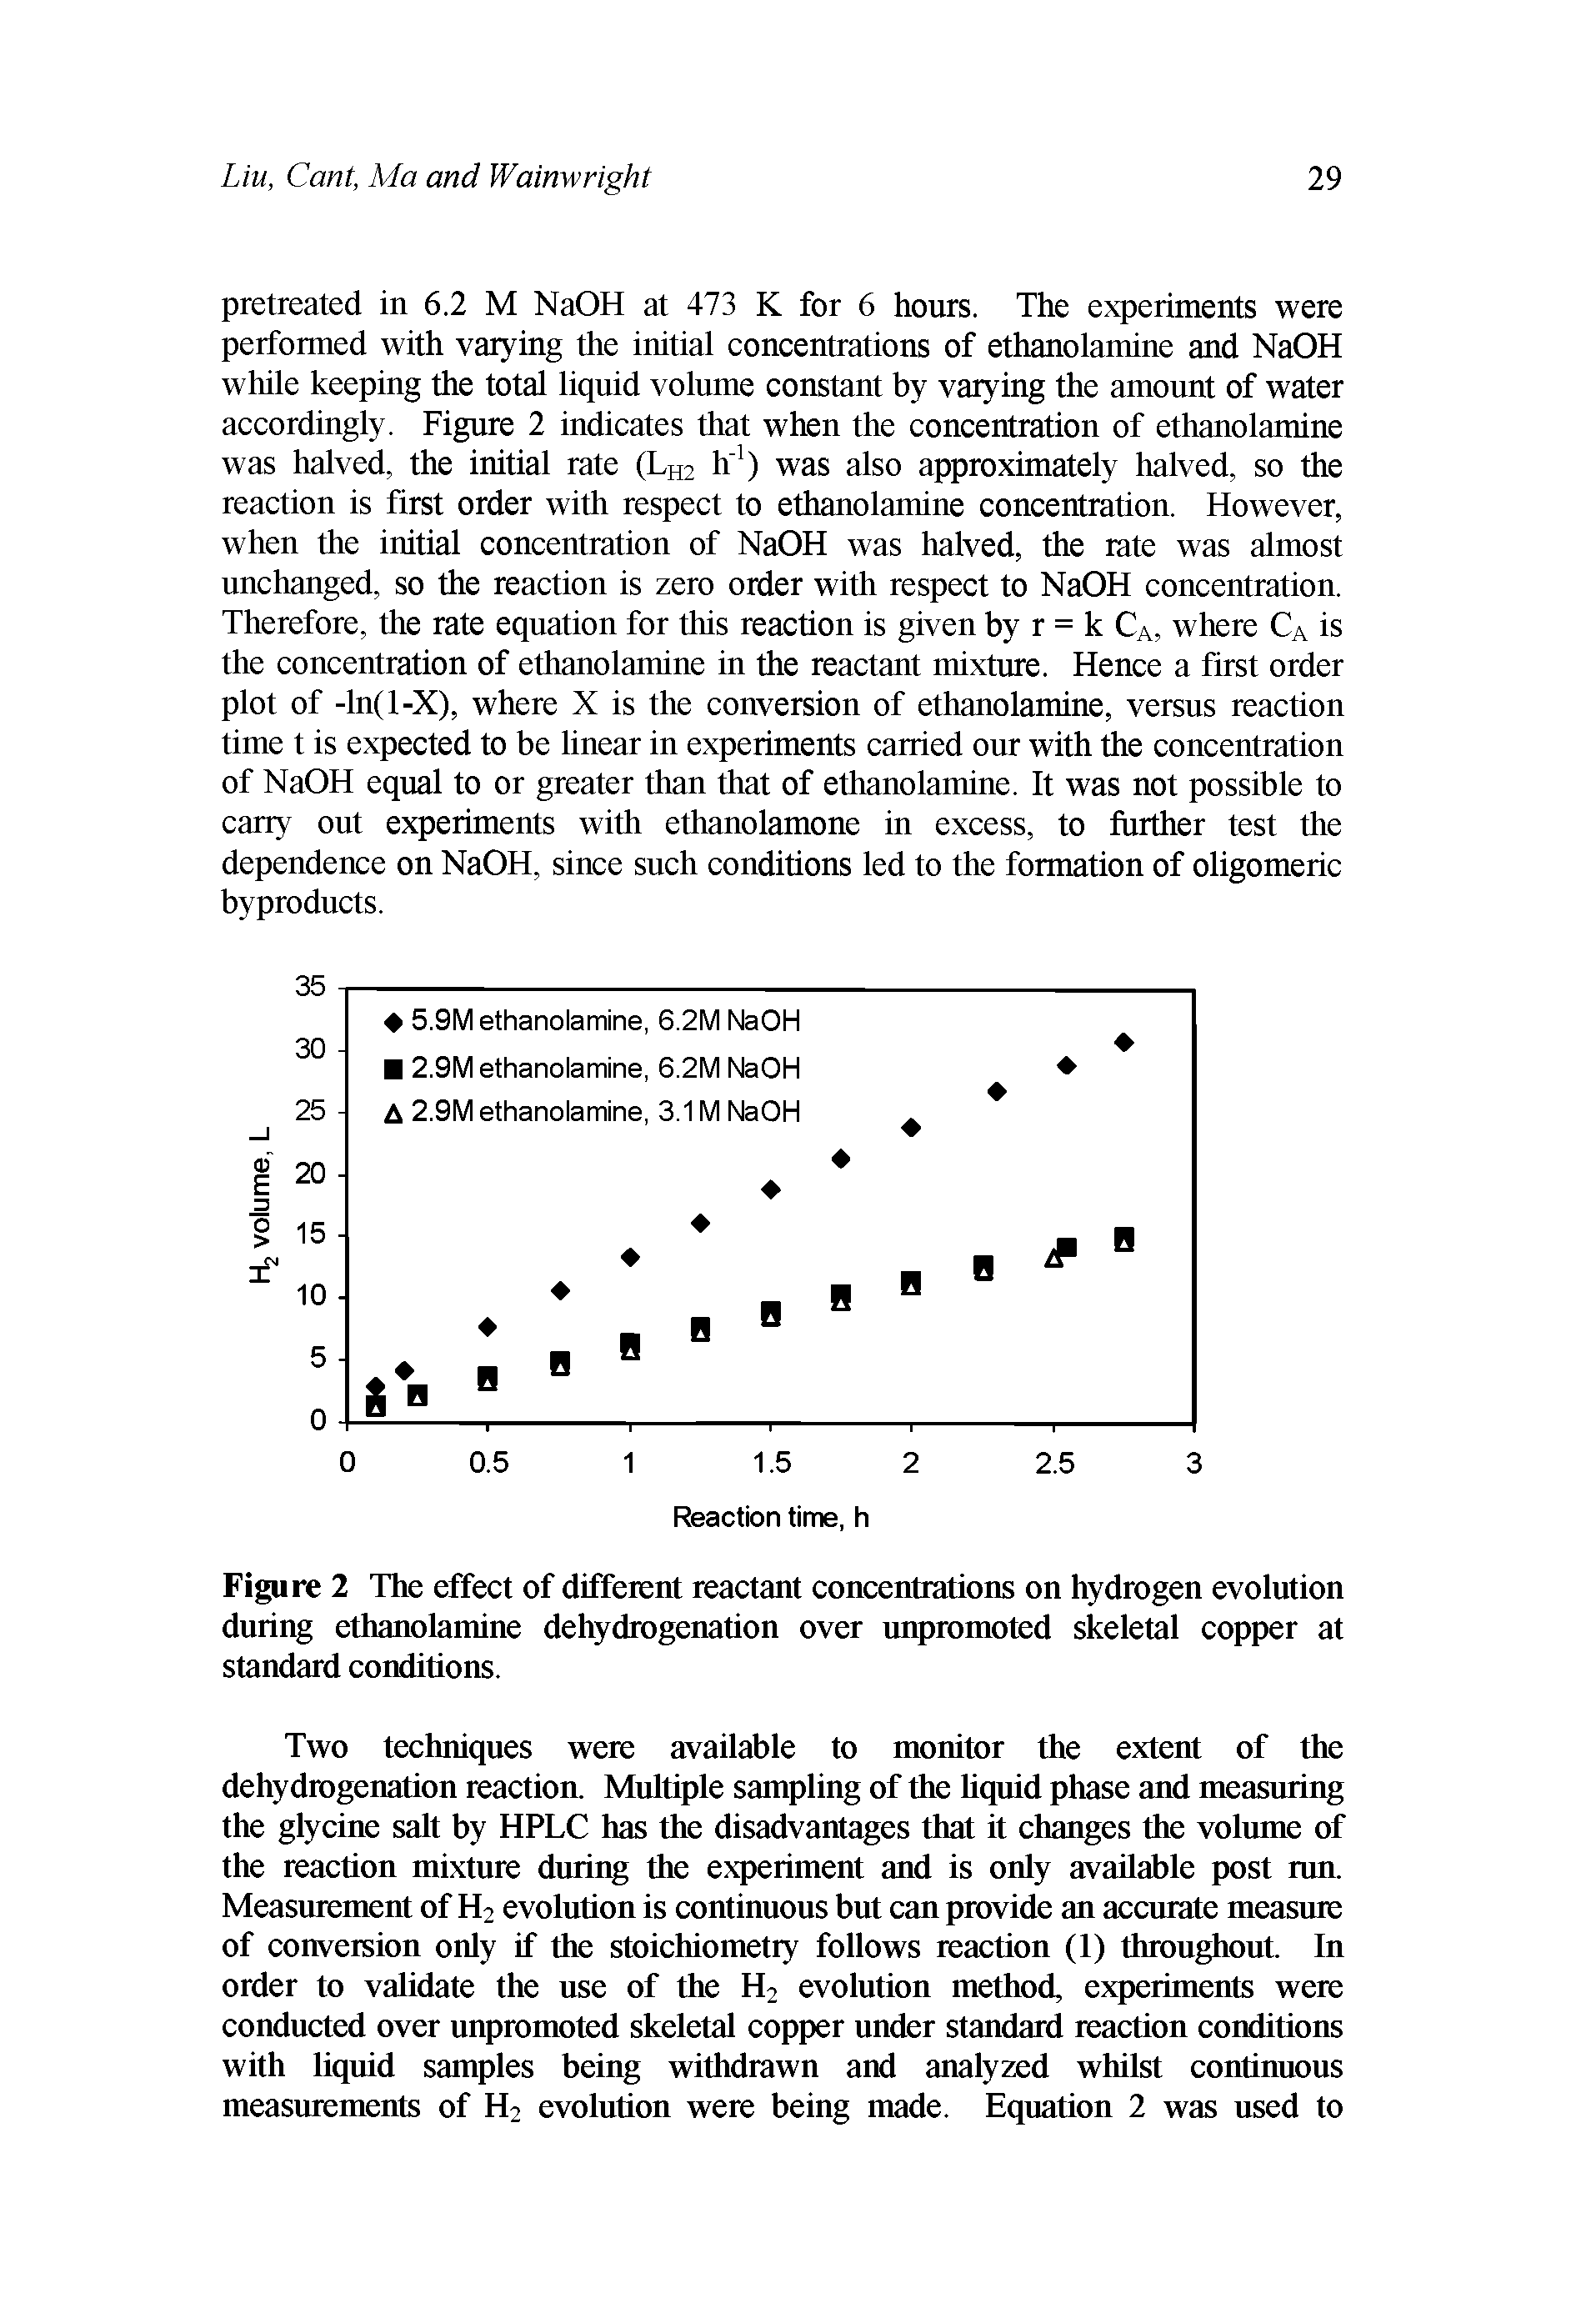 Figure 2 The effect of different reactant concentrations on hydrogen evolution during ethanolamine dehydrogenation over unpromoted skeletal copper at standard conditions.